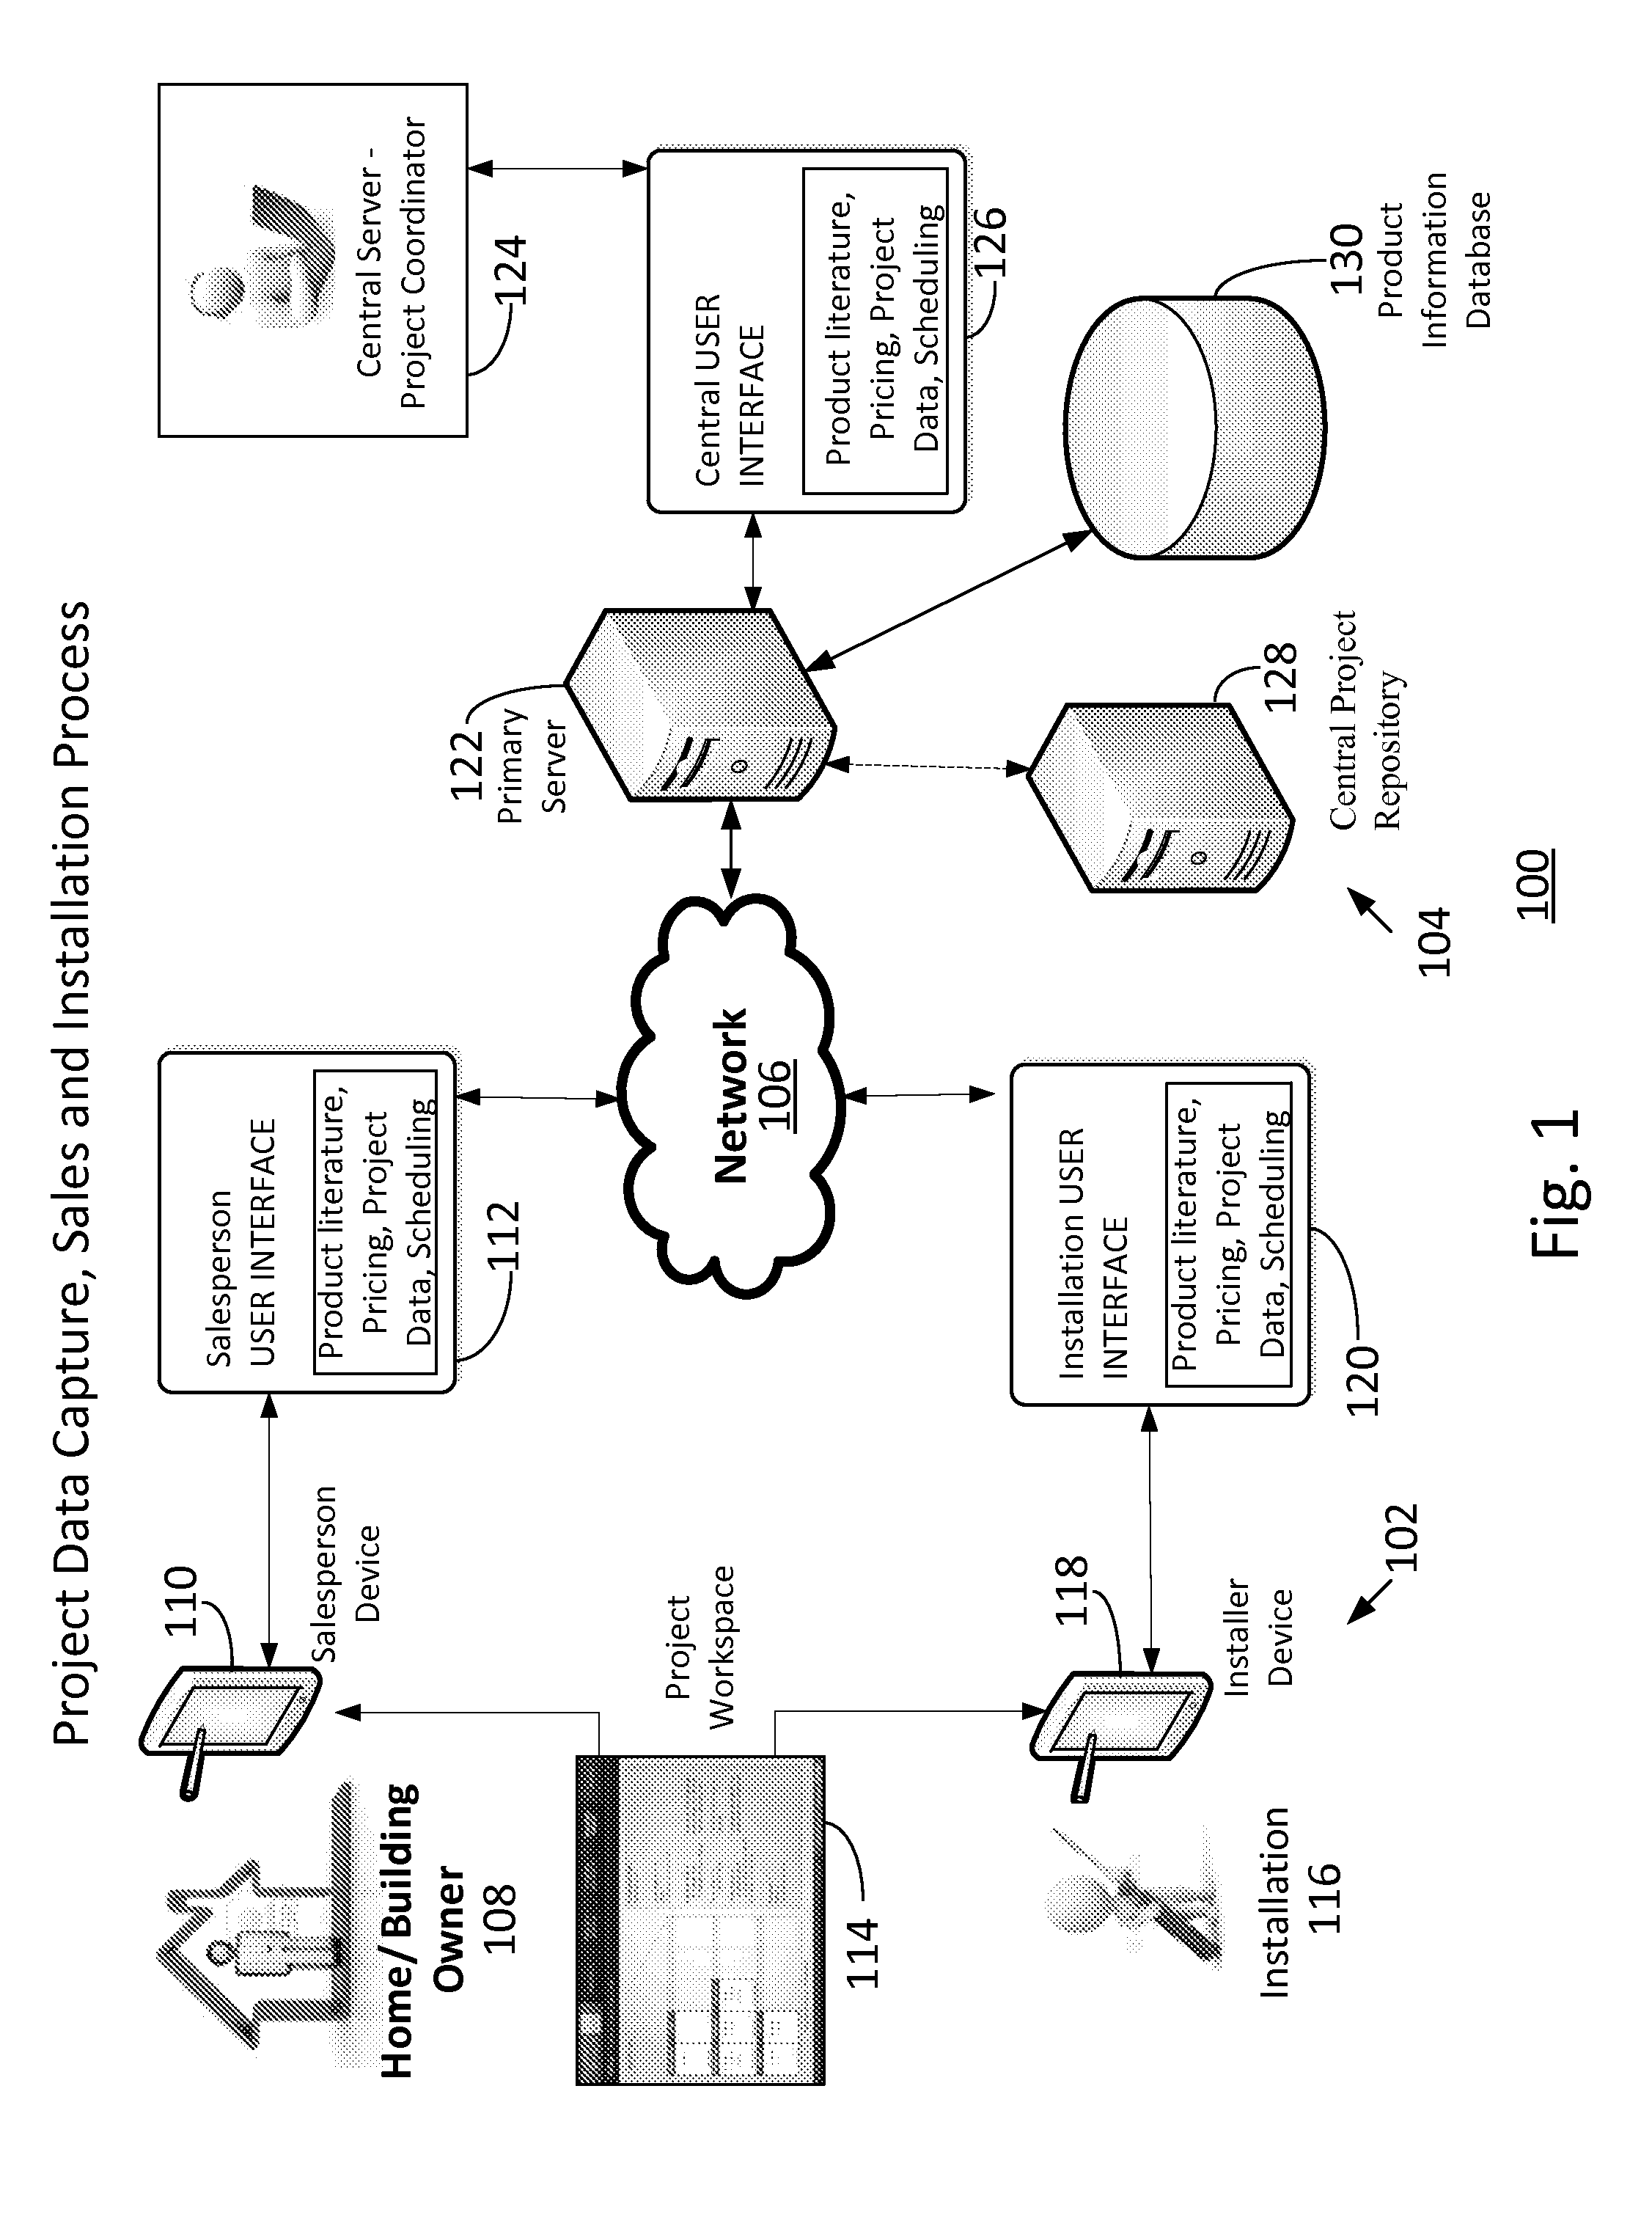 Method and system for providing enhanced sales and marketing tool